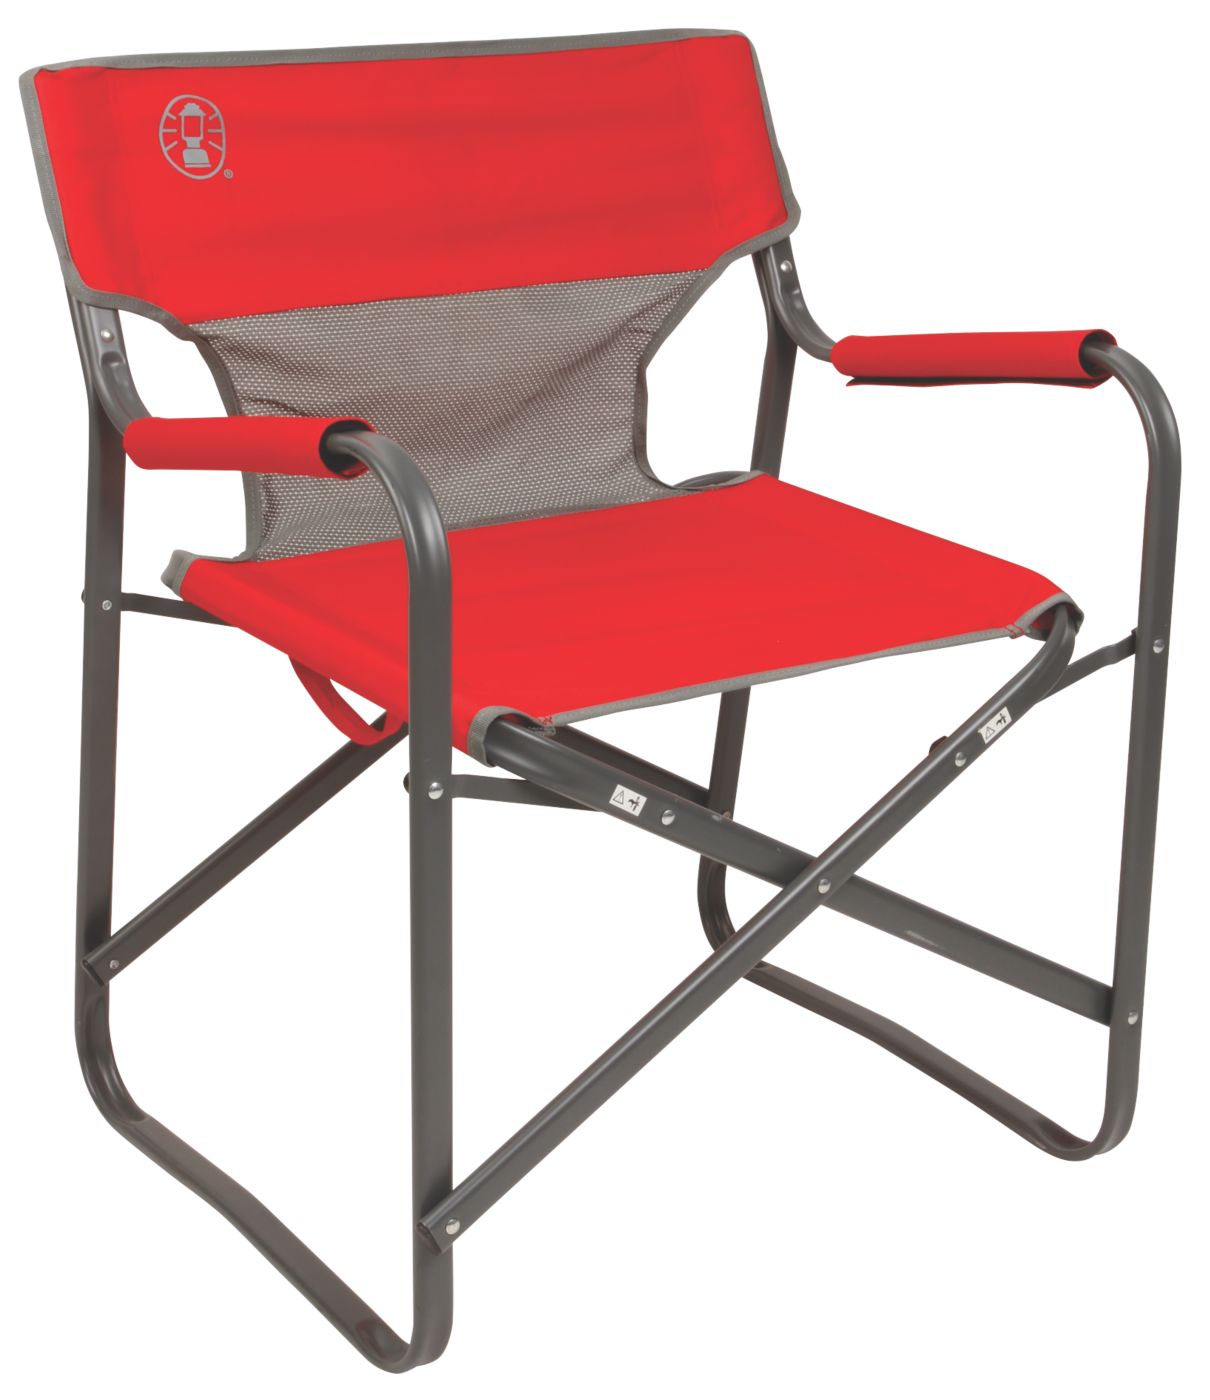 coleman outdoor chairs